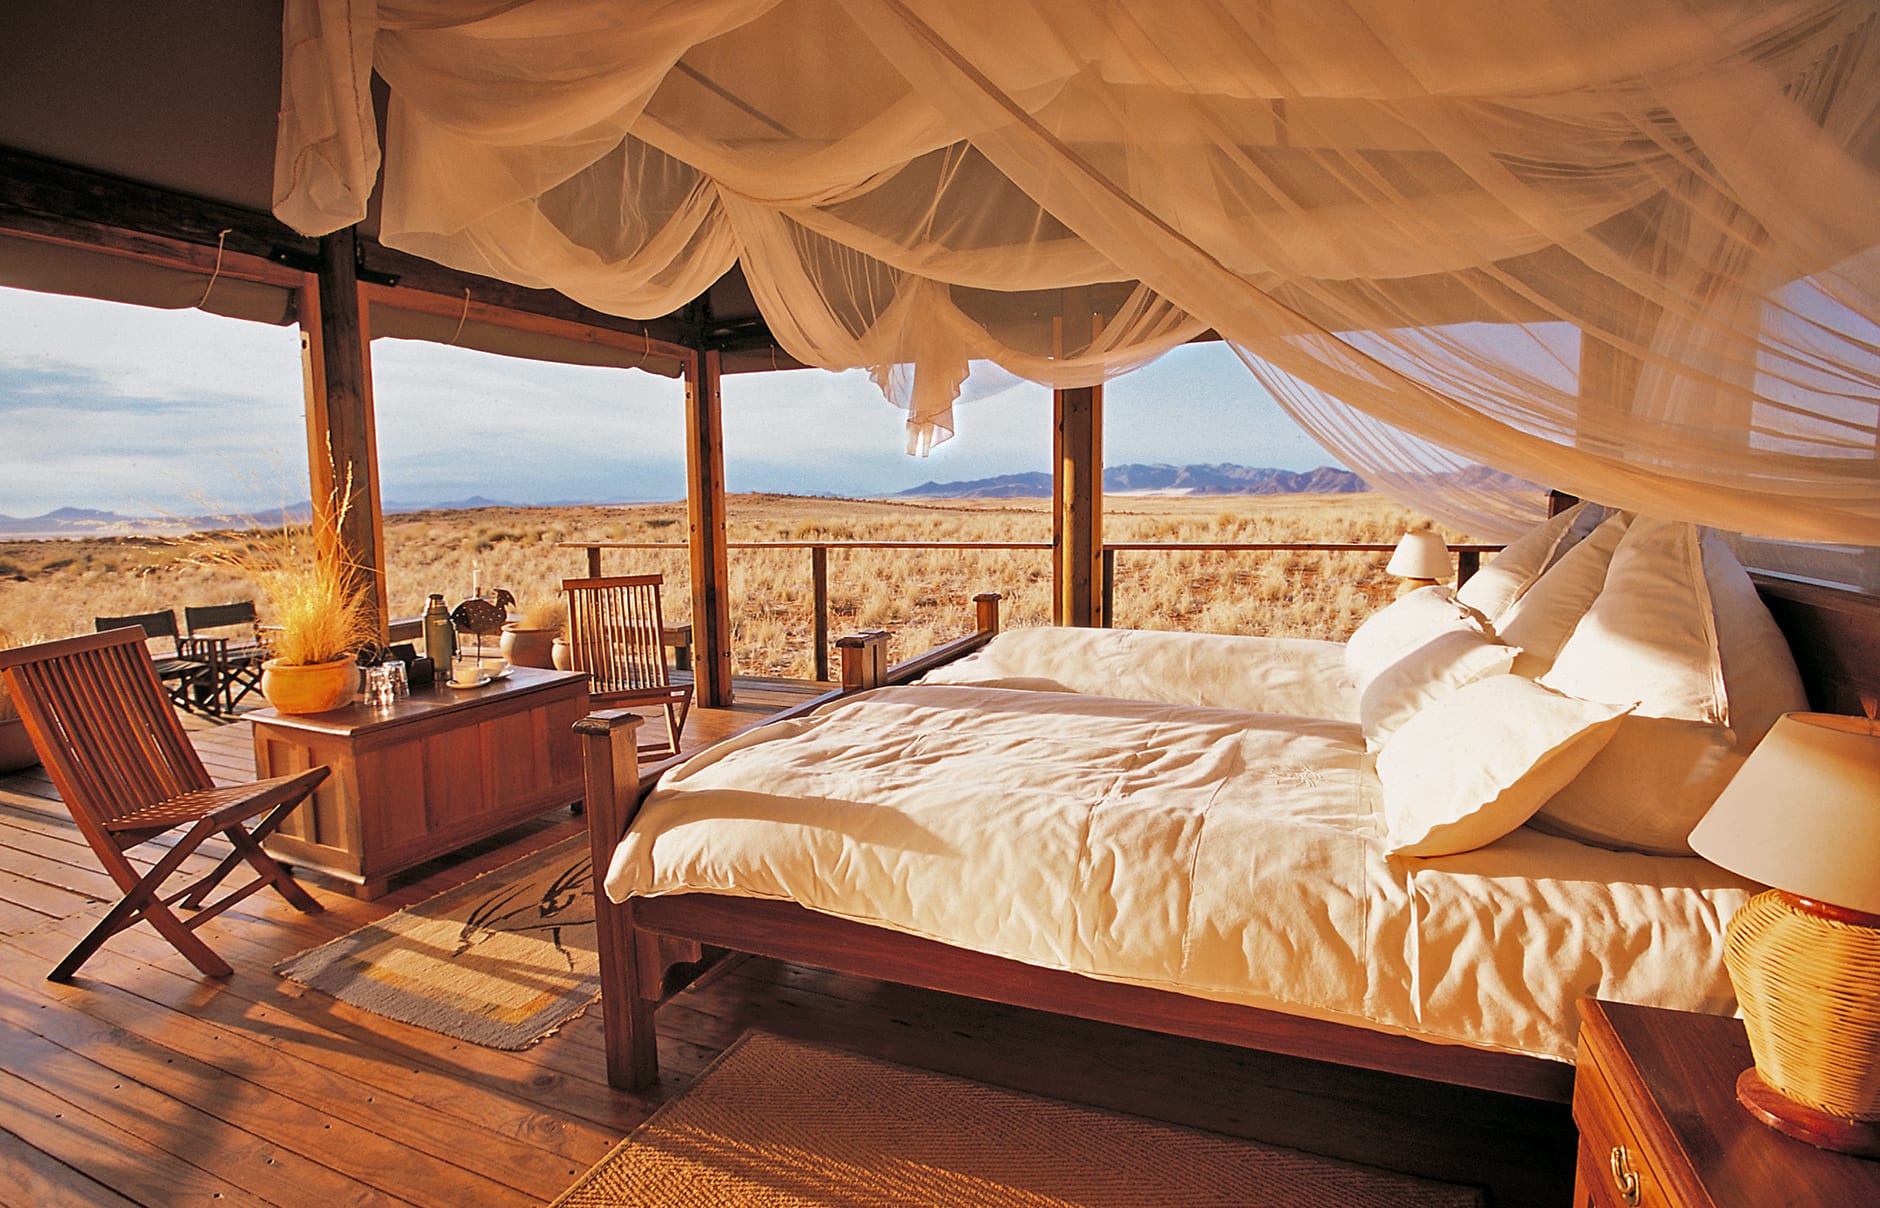 Wolwedans Dunes Lodge, NamibRand, Namibia. Hotel Review by TravelPlusStyle. Photo © Wolwedans